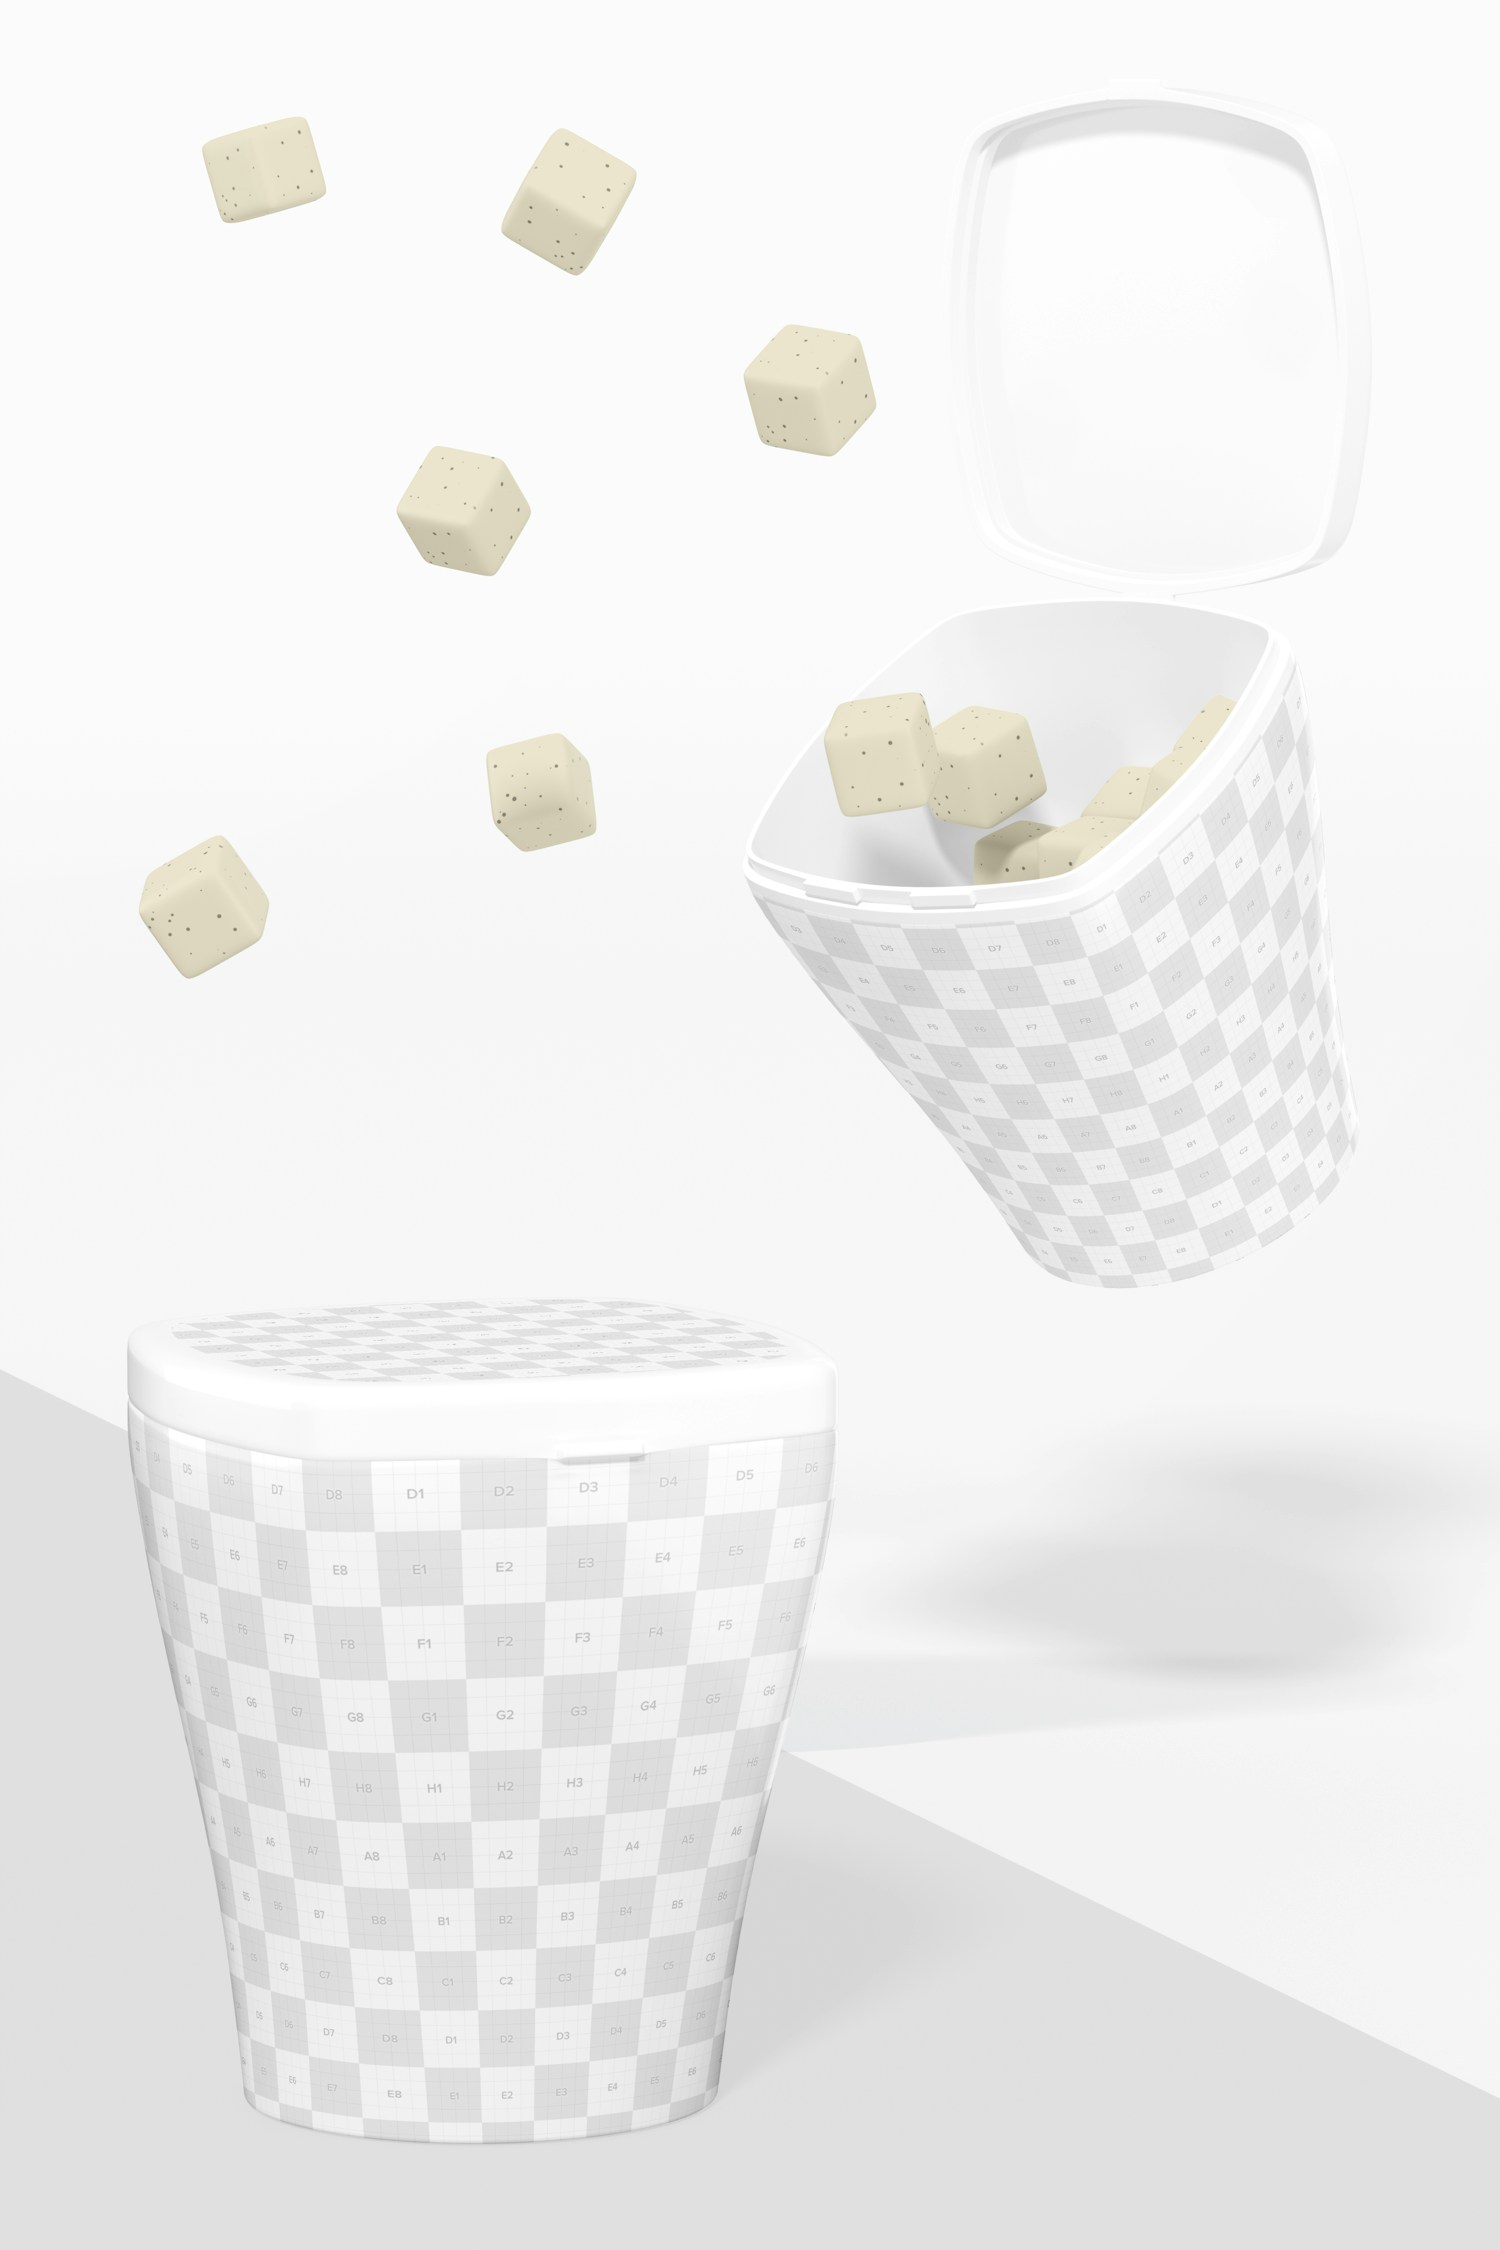 Plastic Candy Boxes Mockup, Floating